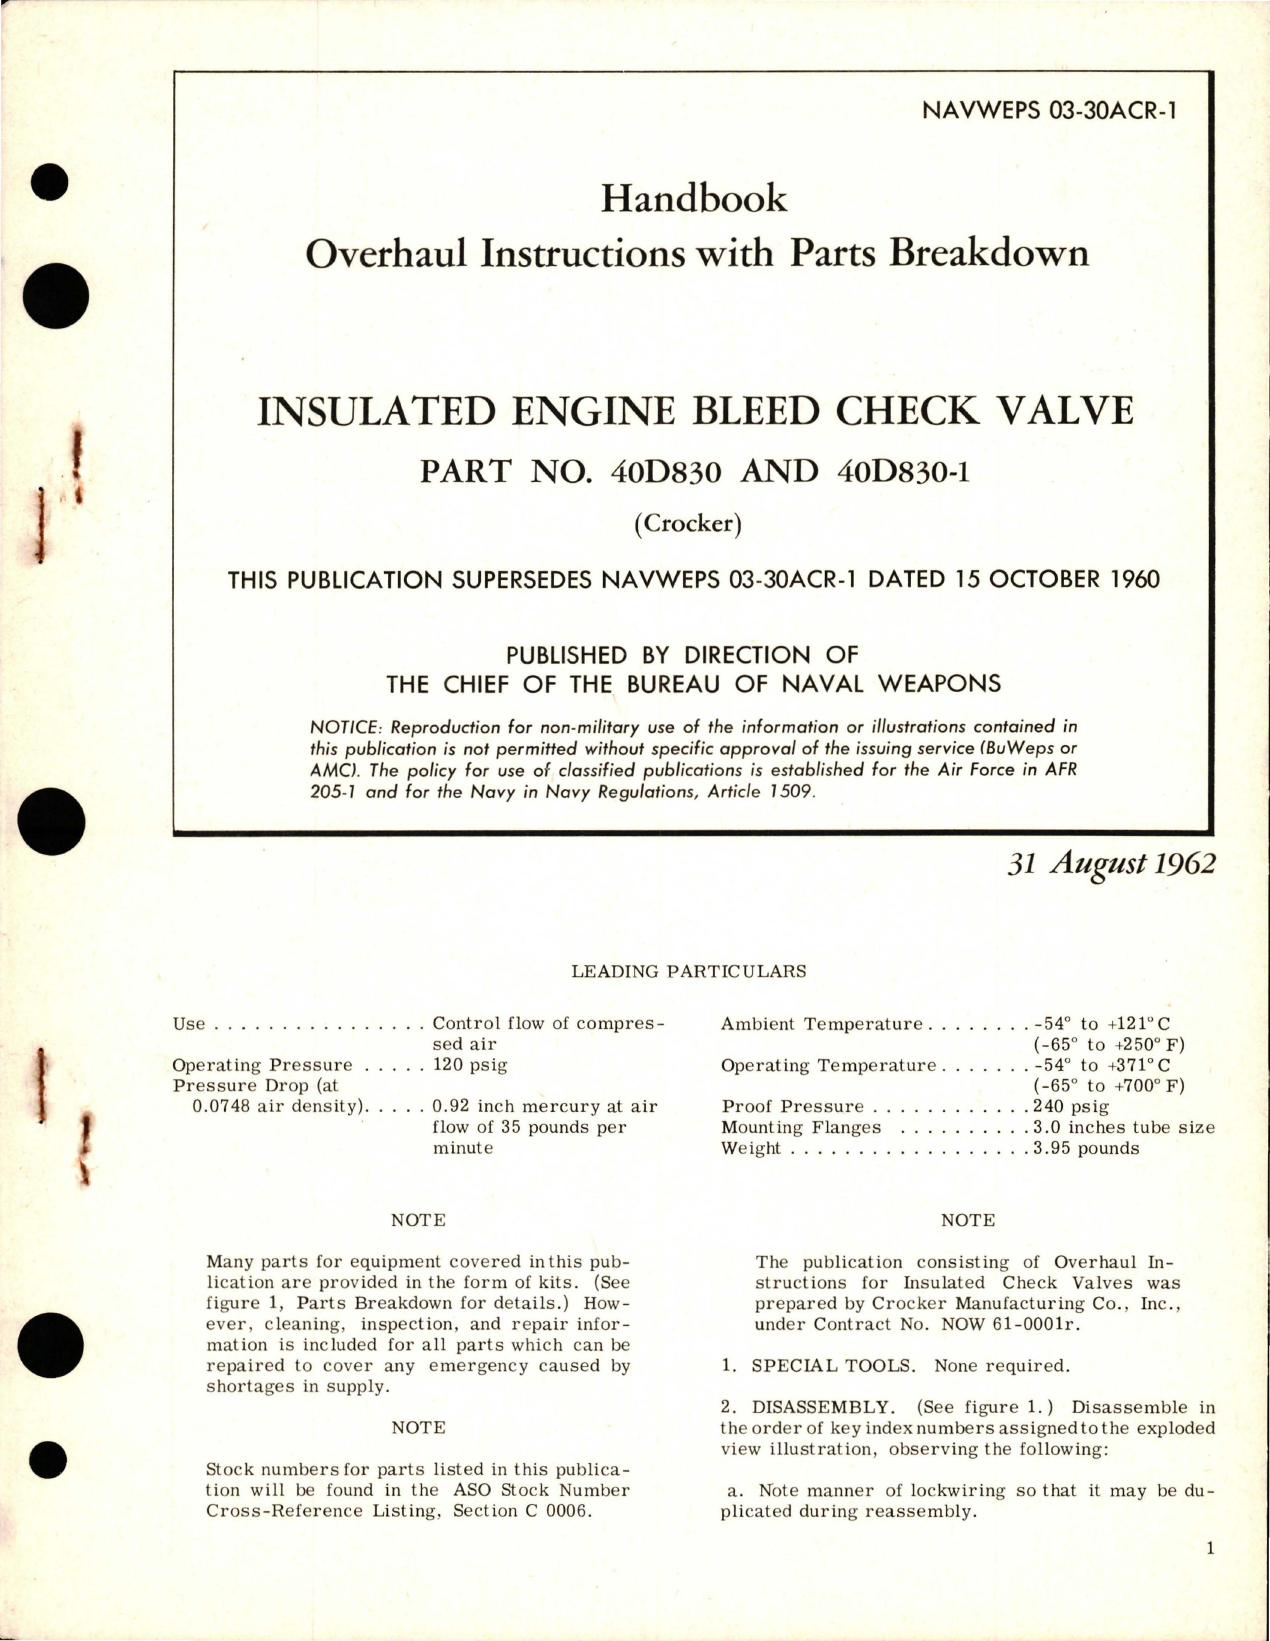 Sample page 1 from AirCorps Library document: Overhaul Instructions with Parts Breakdown for Insulated Engine Bleed Check Valve - Part 40D830 and 40D830-1 